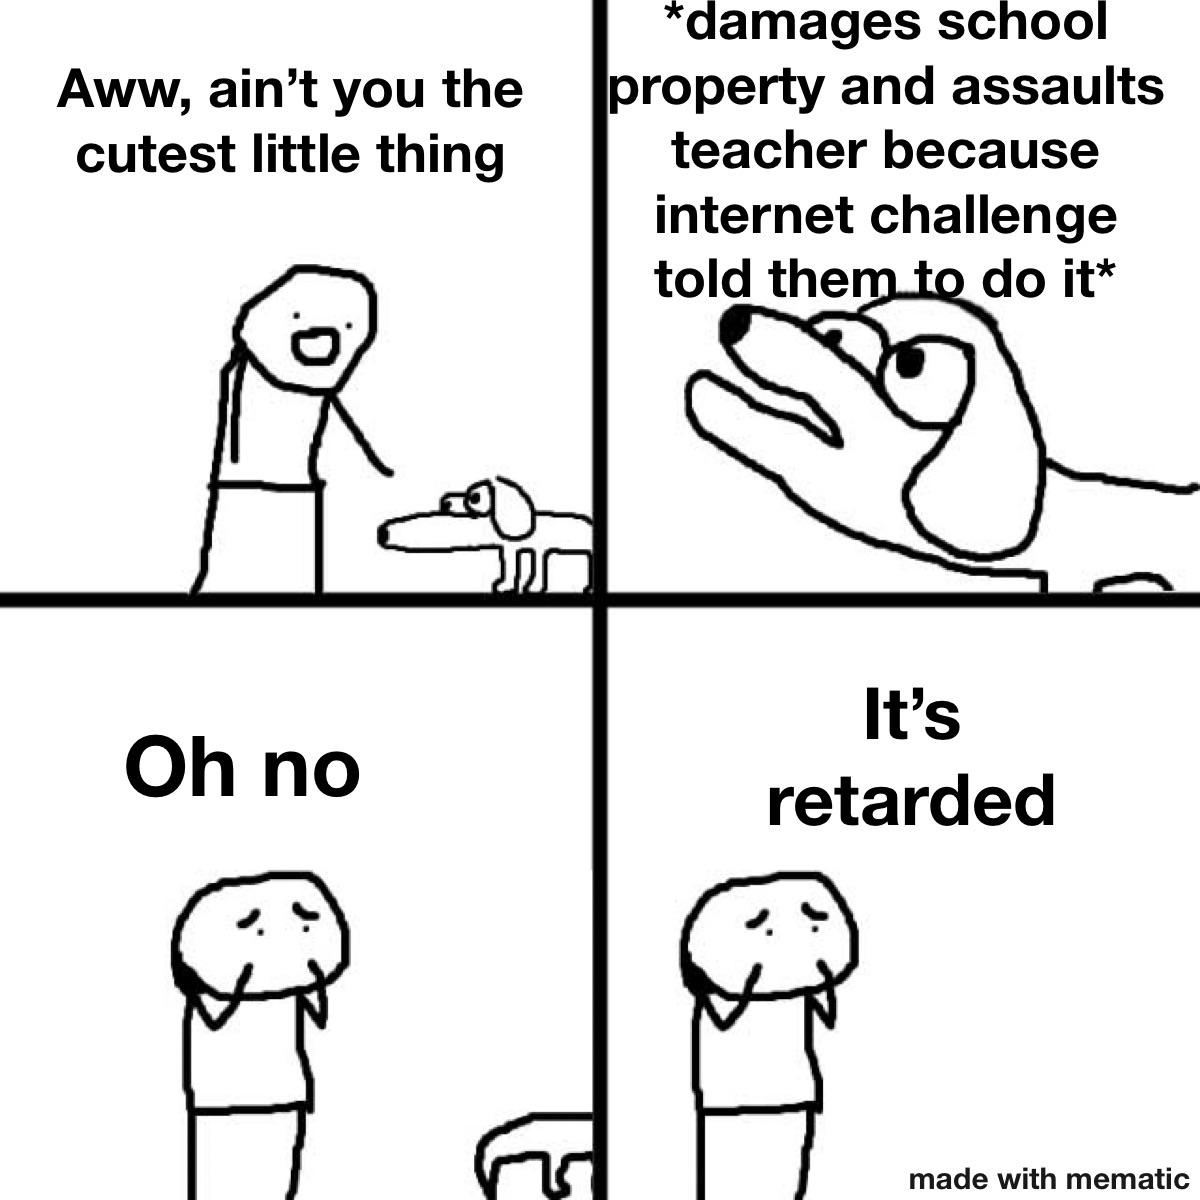 aww it's retarded - Aww, ain't you the cutest little thing damages school property and assaults teacher because internet challenge told them to do it Oh no It's retarded made with mematic